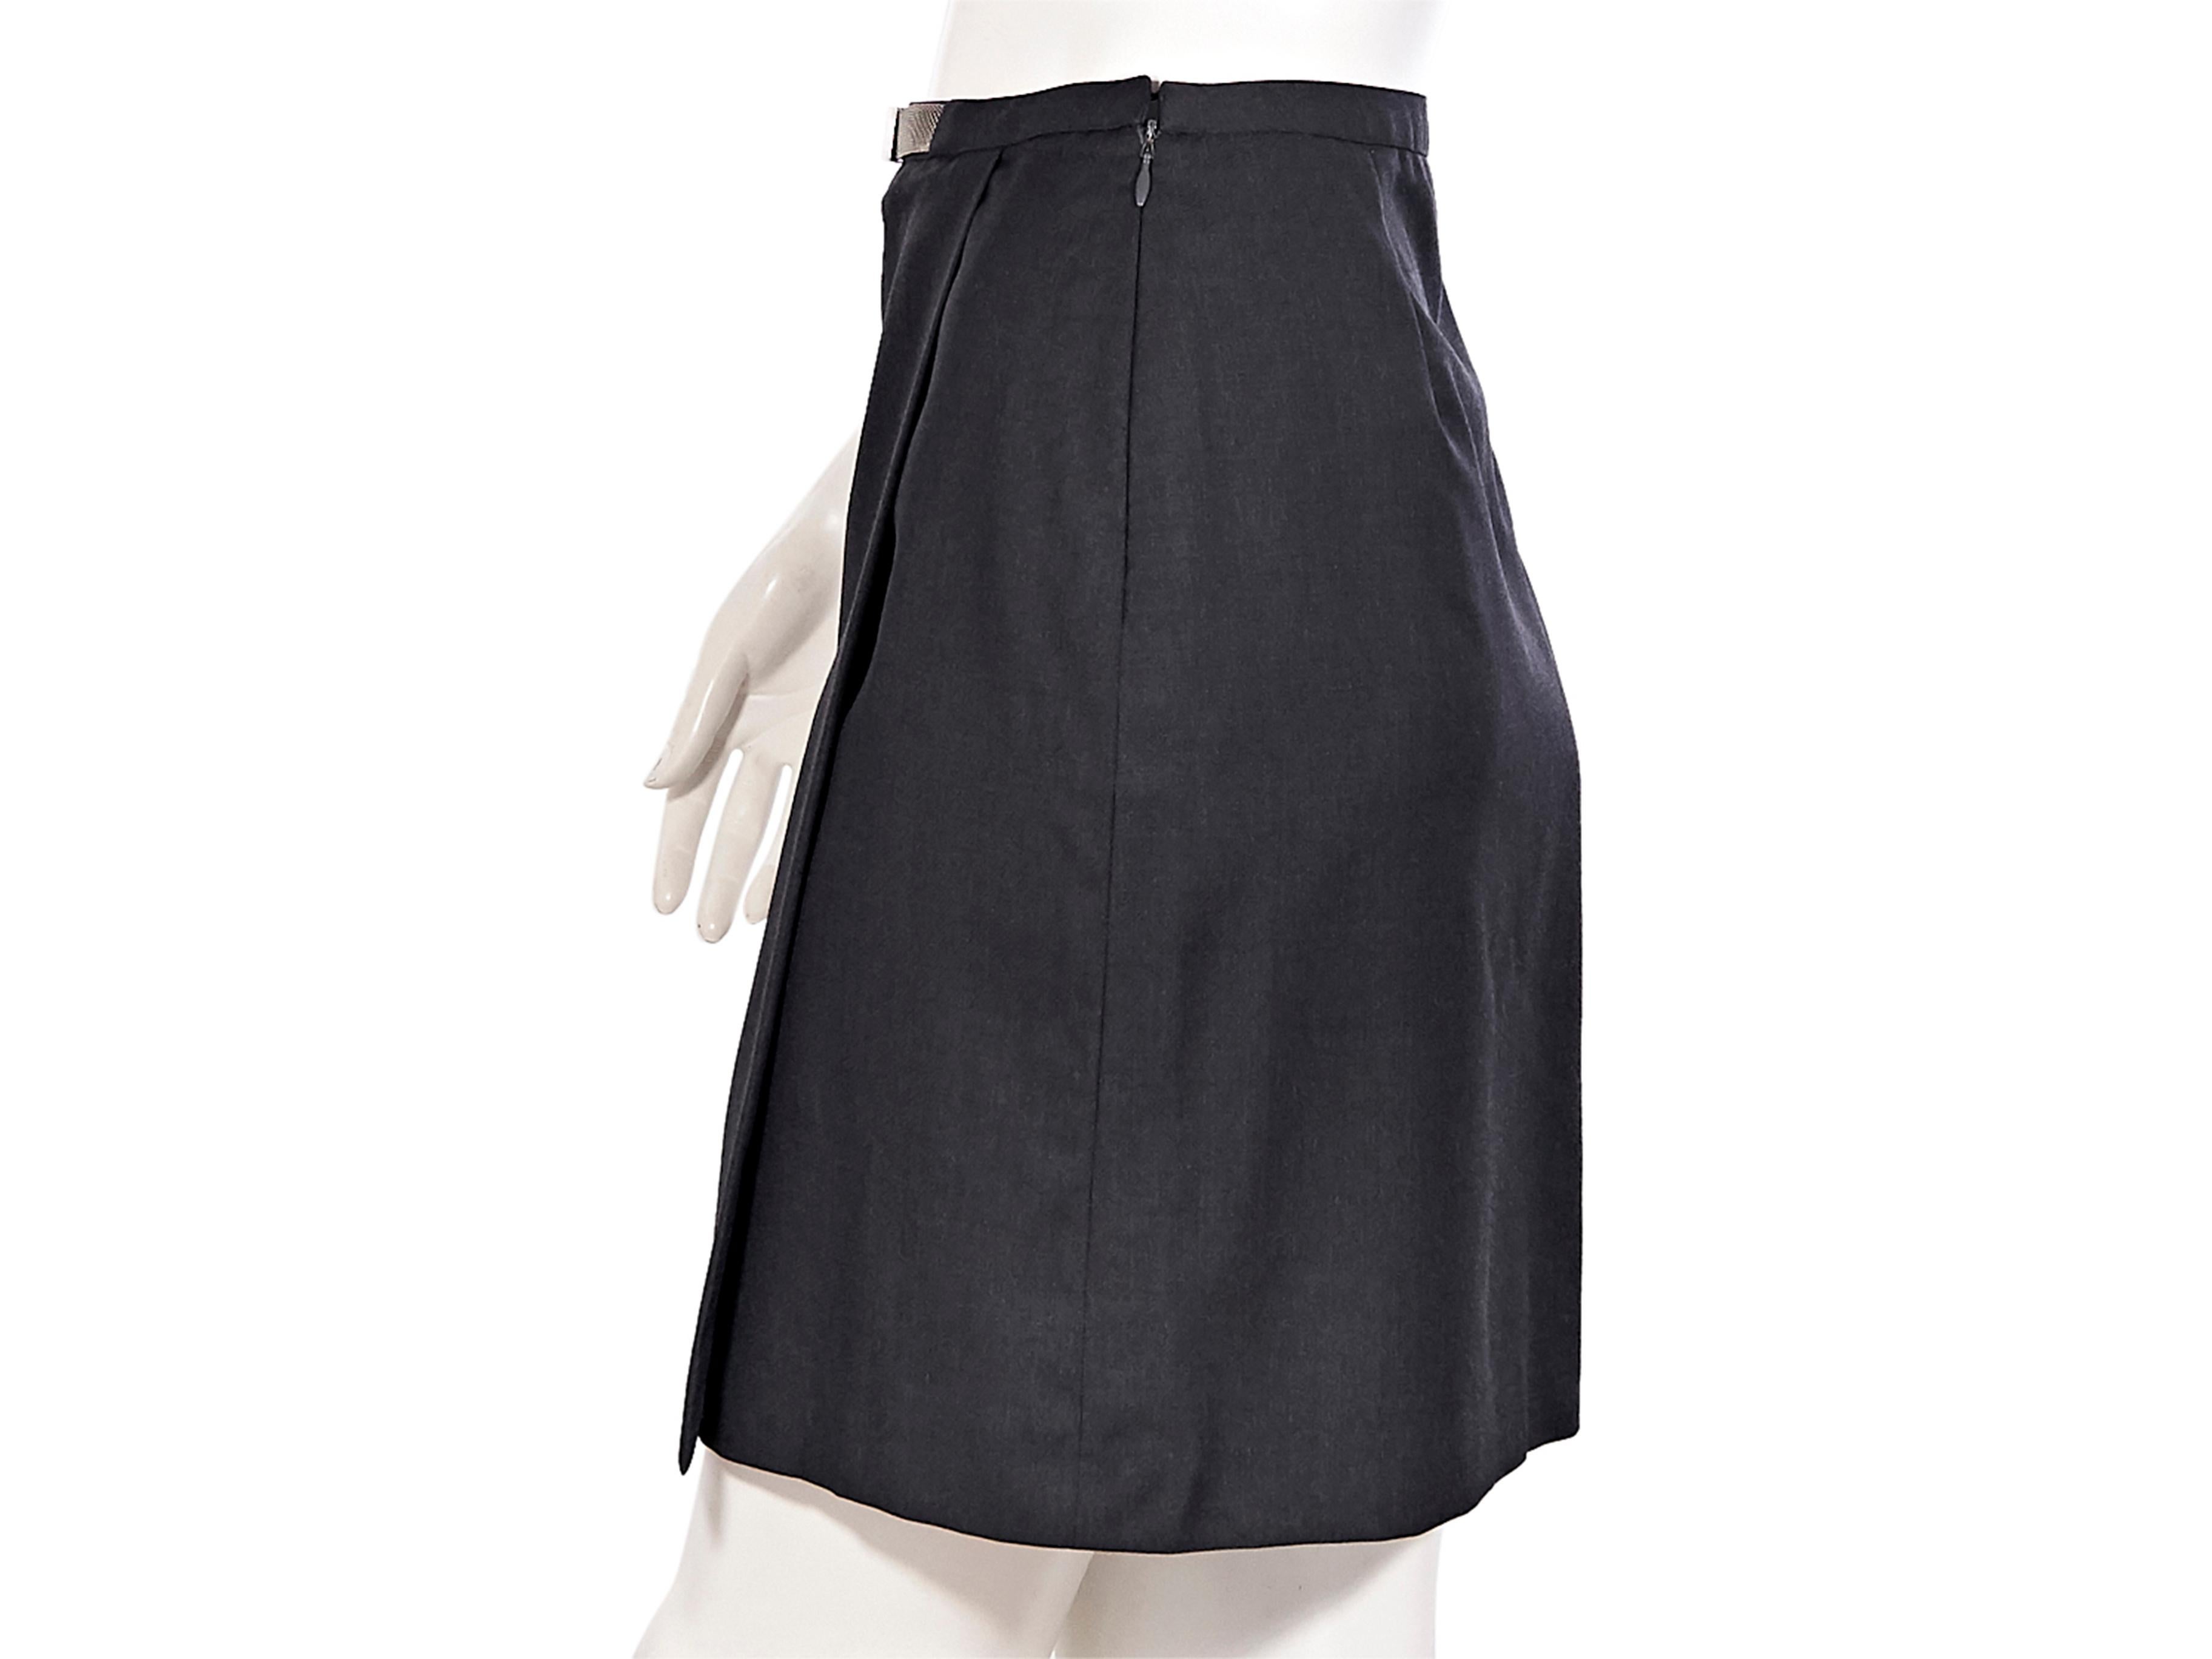 Product details: Vintage black wool mini skirt by Gianni Versace Couture. Logo-embossed silver-tone mesh-accented belt at front. Concealed side zip closure. Pair with black Mary-Jane pumps. Label size IT 40. 29